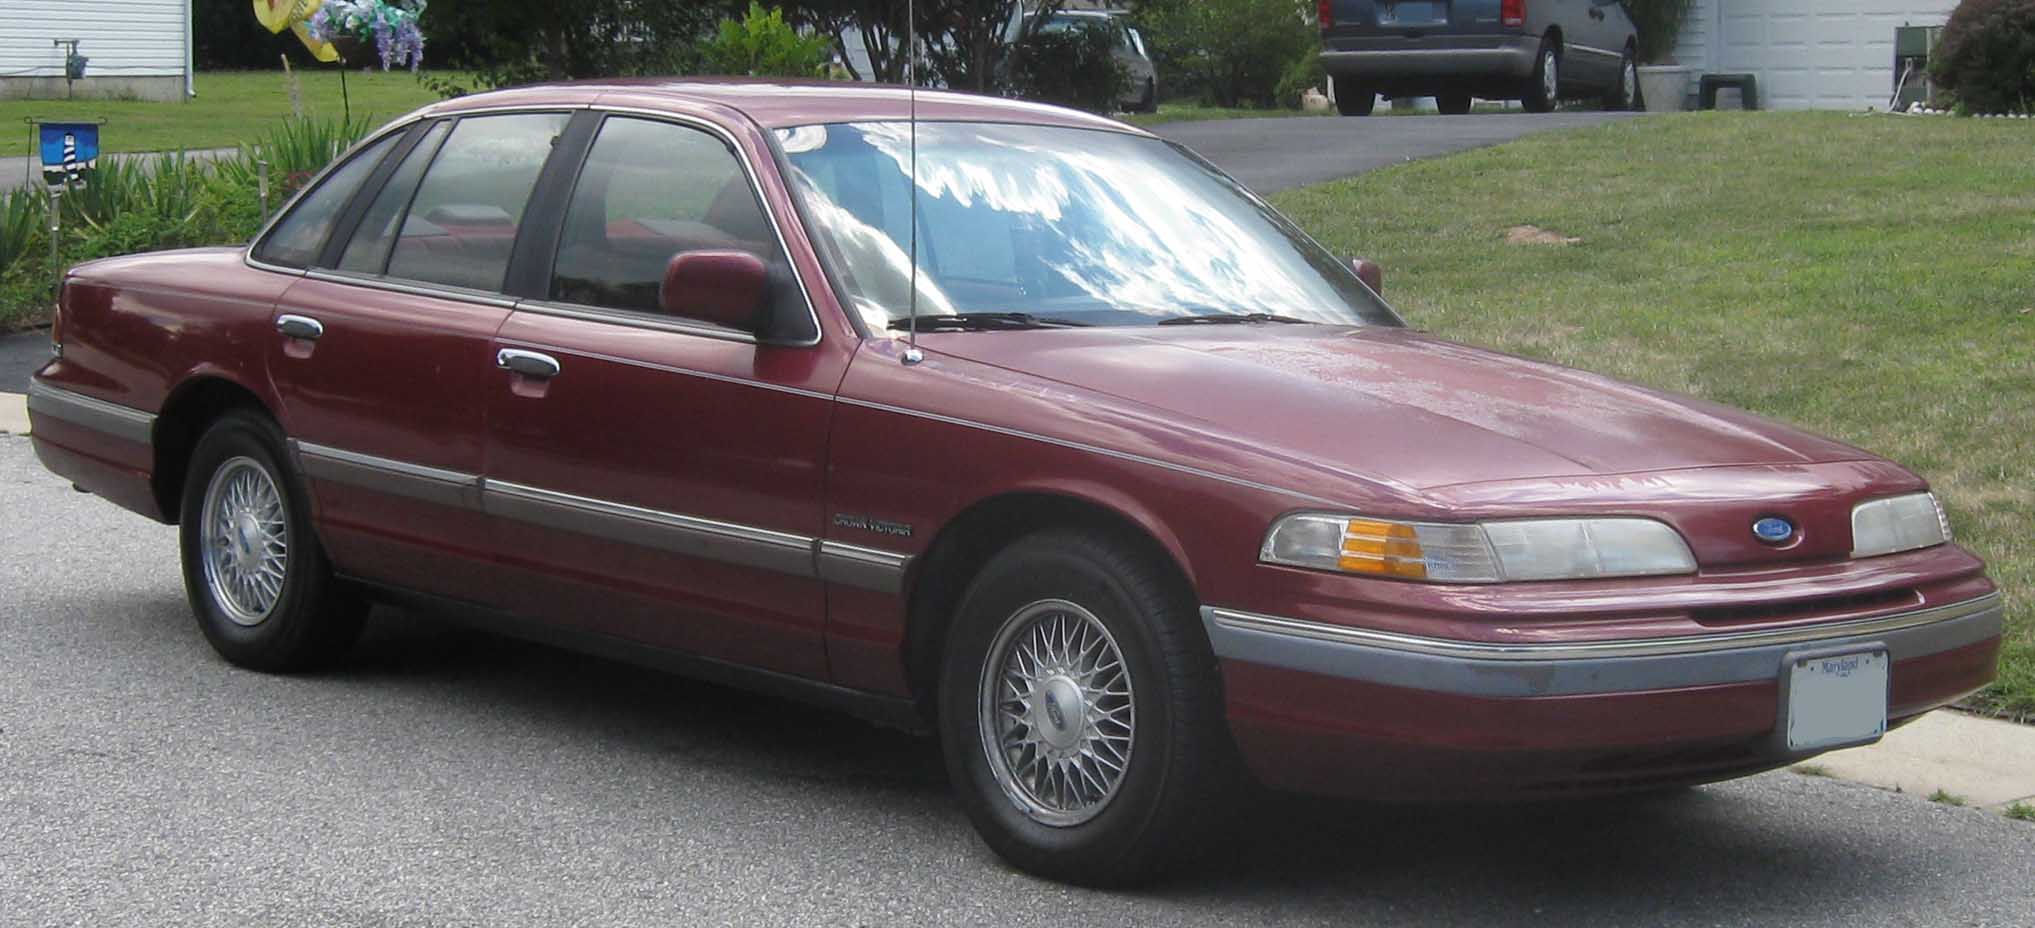 Ford Crown Victoria 1997 #5